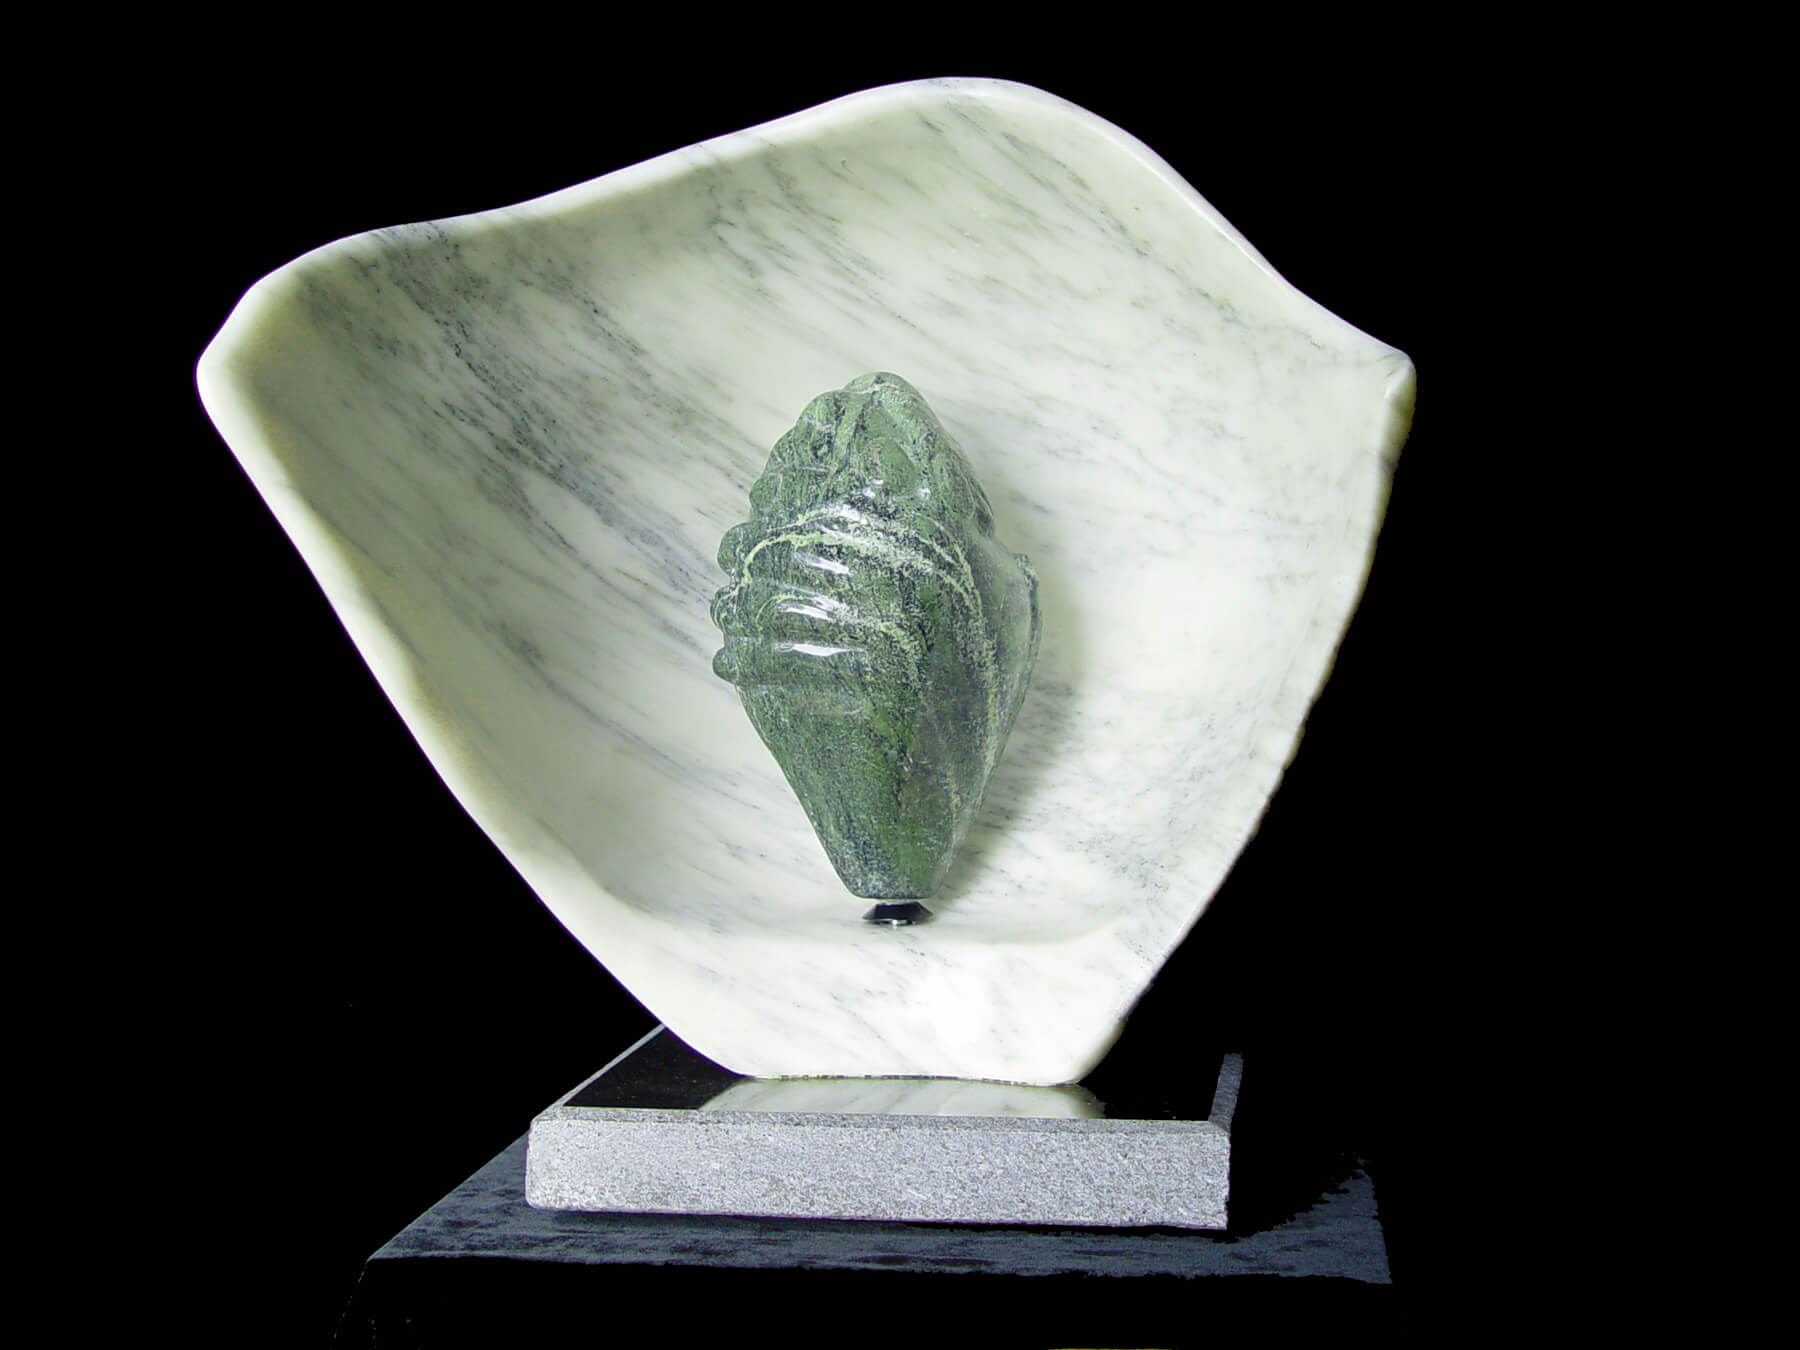 A marble sculpture of a leaf on top of a black base.